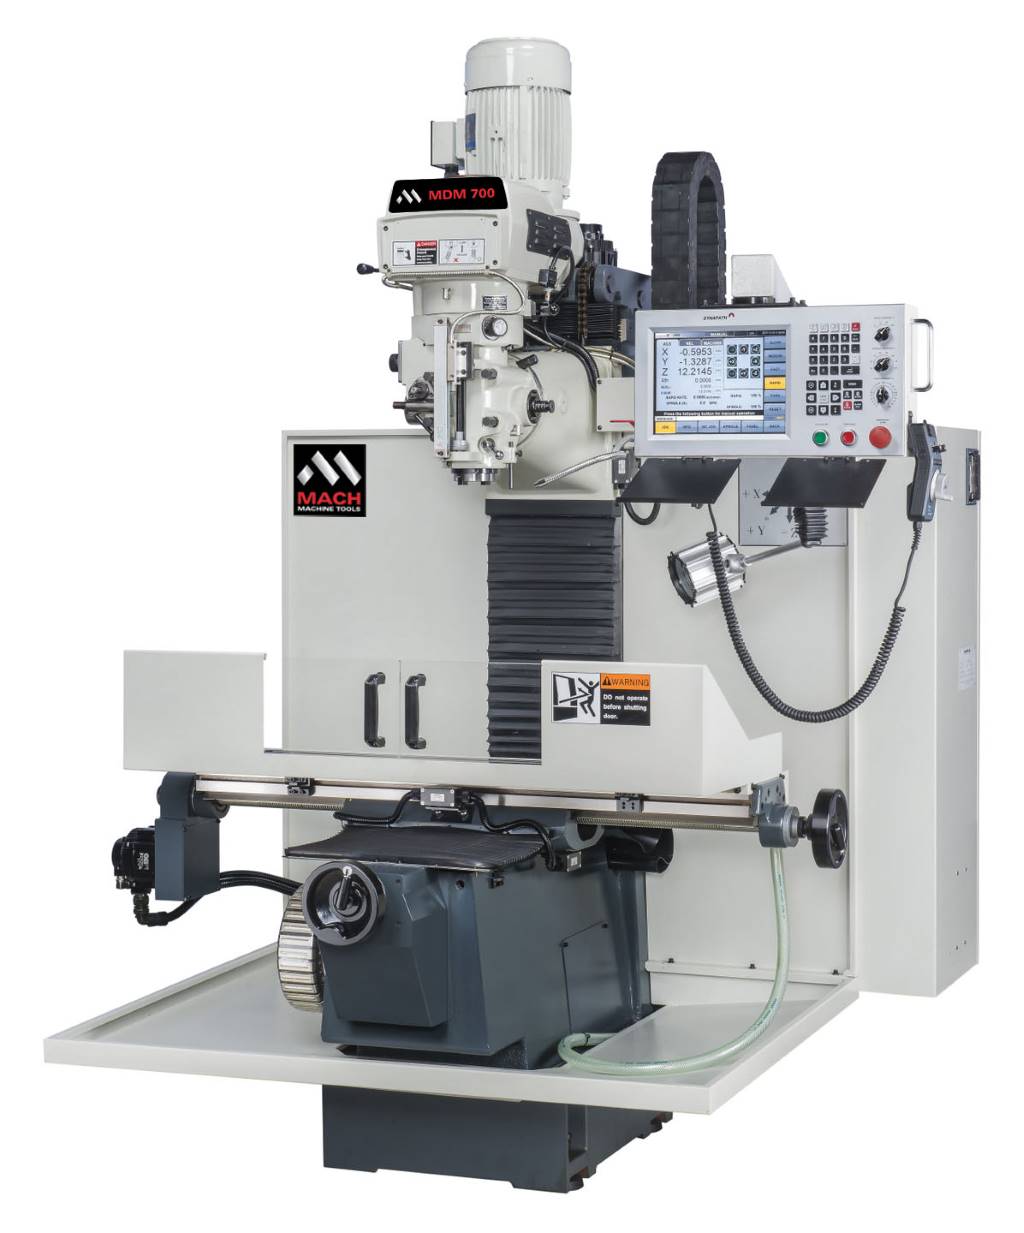 The Mach MDM 700 is a popular and proven machine with a 5,000rpm spindle and 1,244mm x 228mm worktable